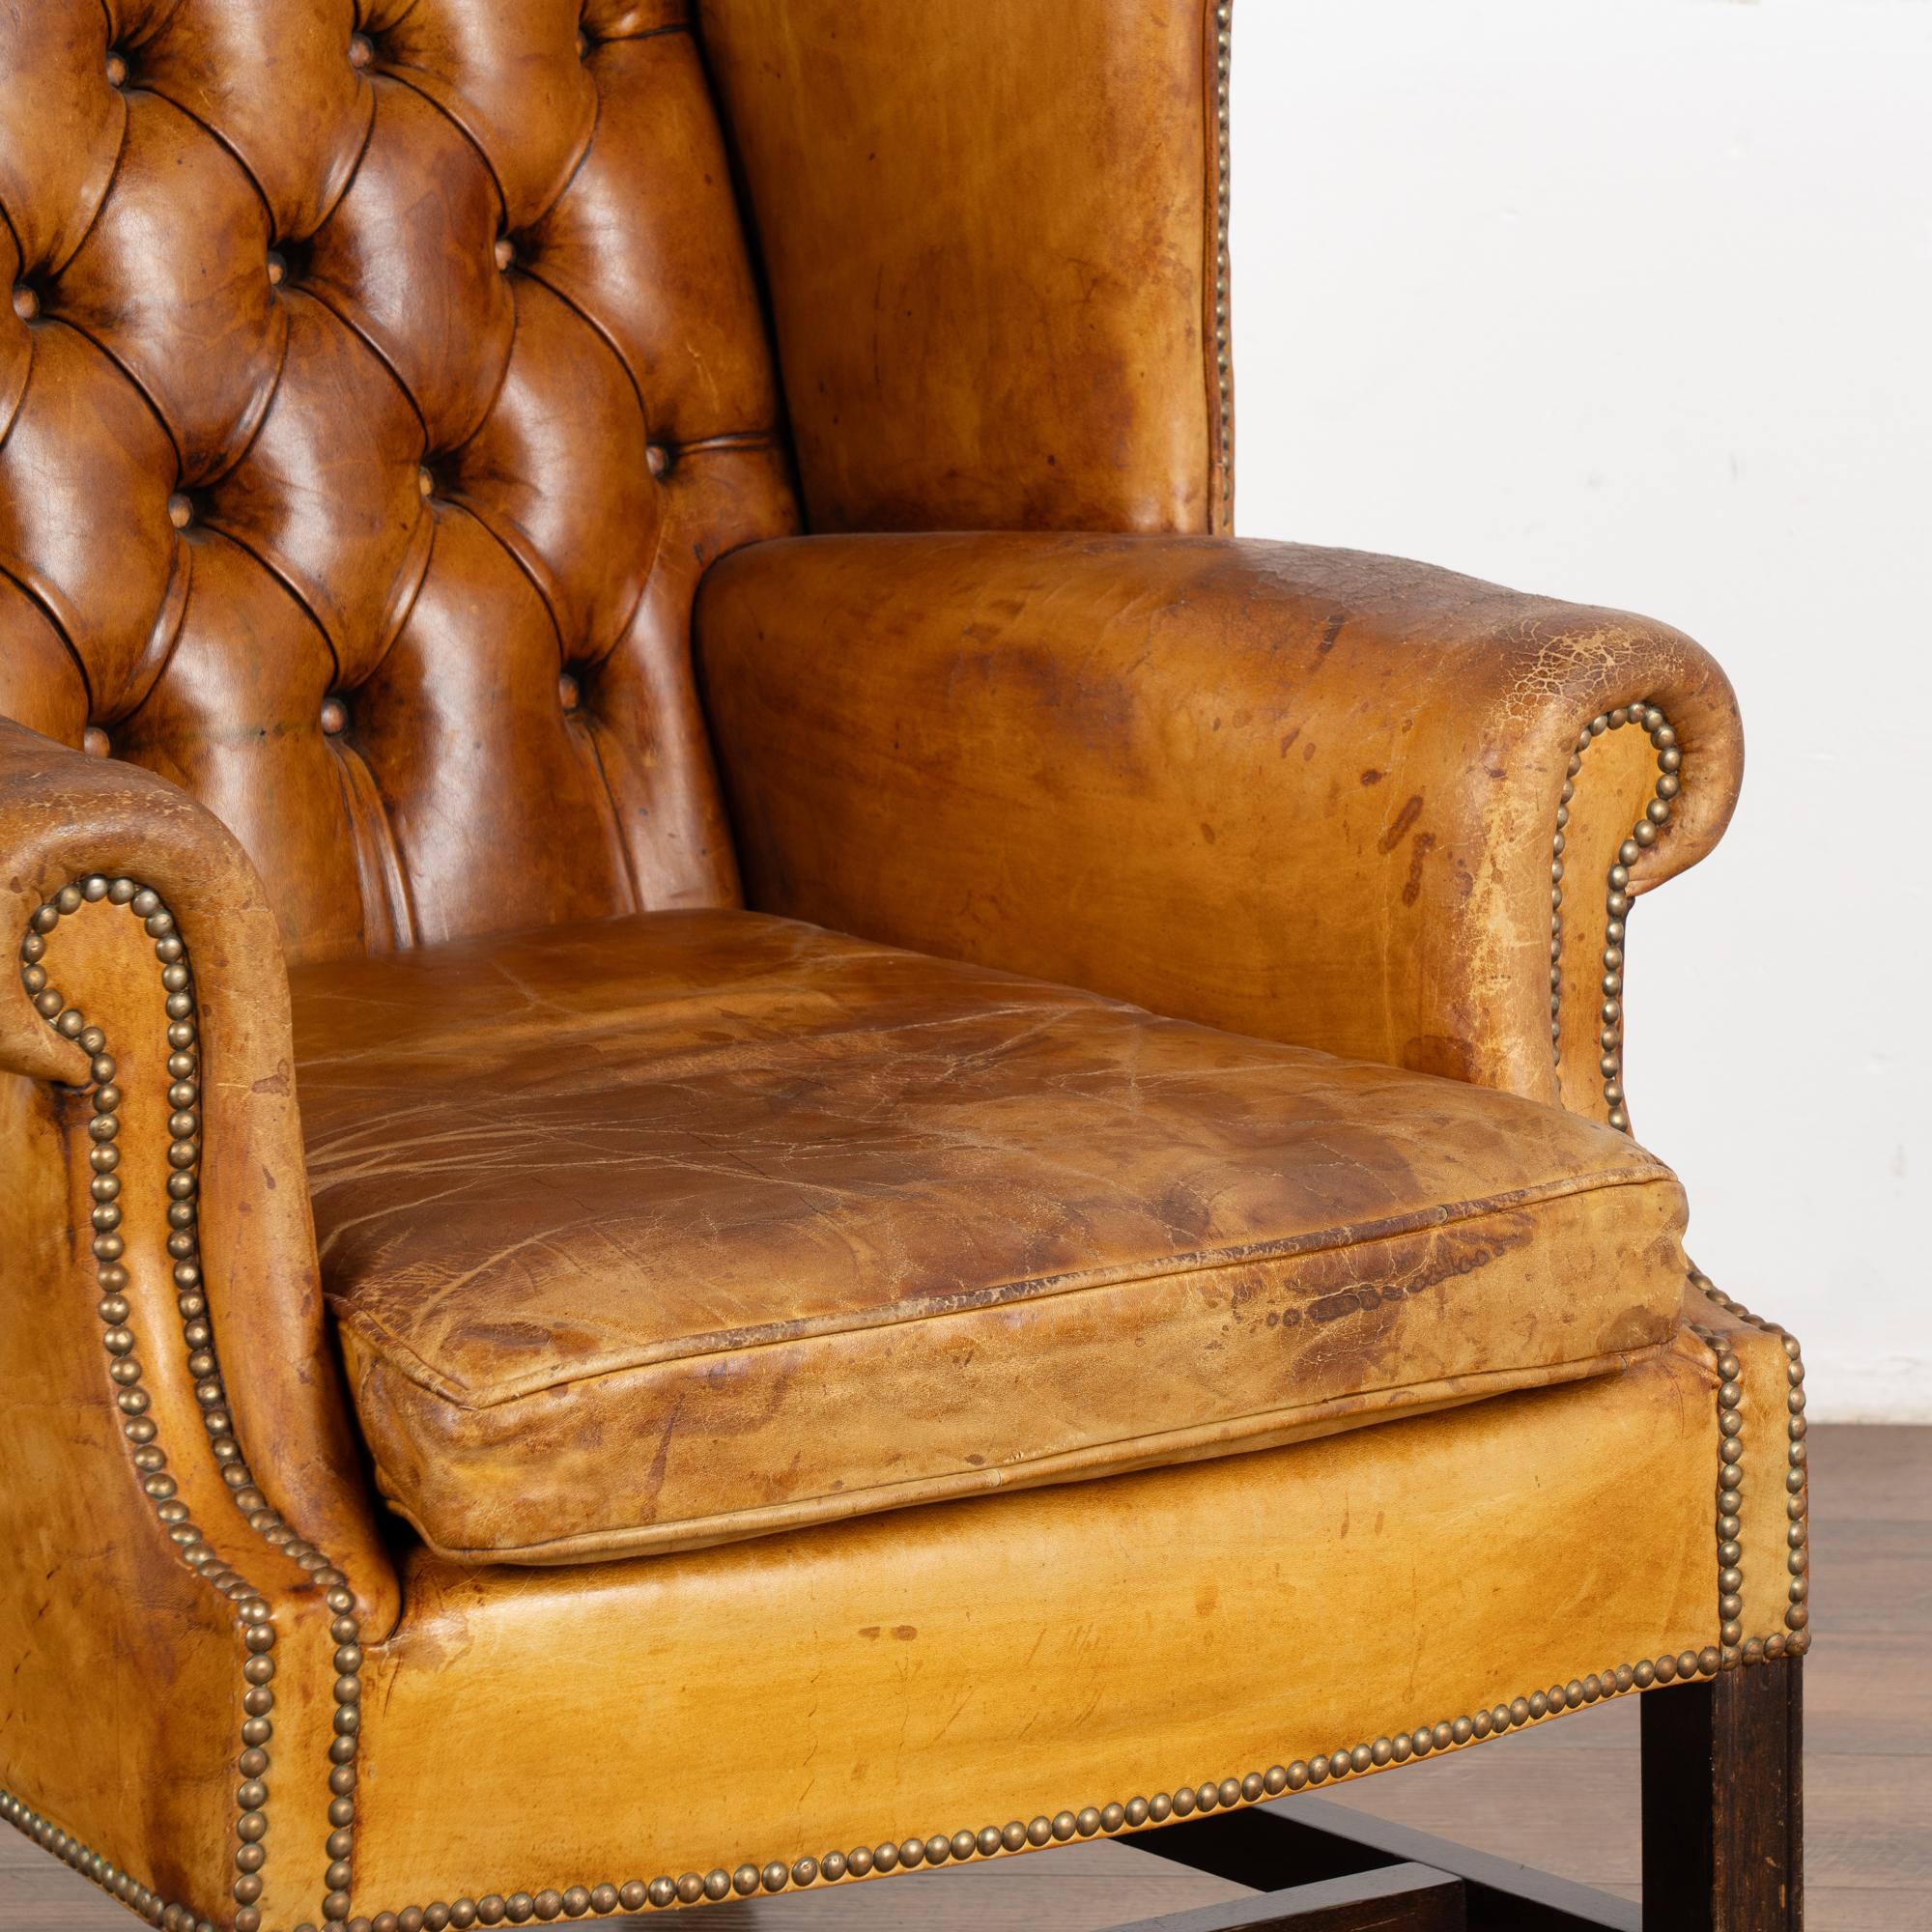 Vintage Brown Leather Wingback Chesterfield Arm Chair, England circa 1940 For Sale 3